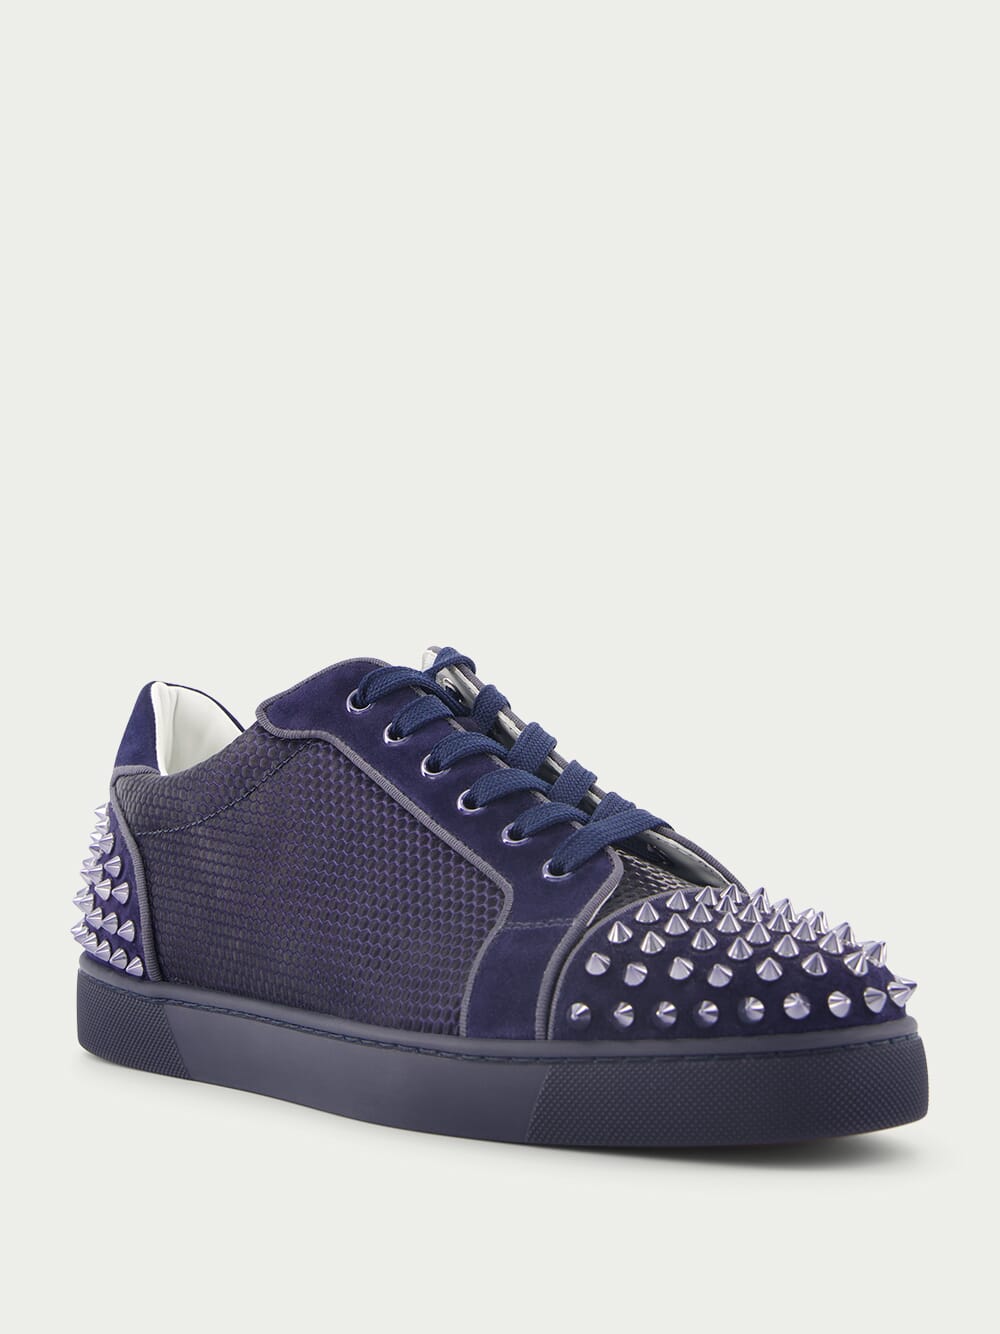 Christian LouboutinSeavaste 2 low-top veau velours sneakers at Fashion Clinic